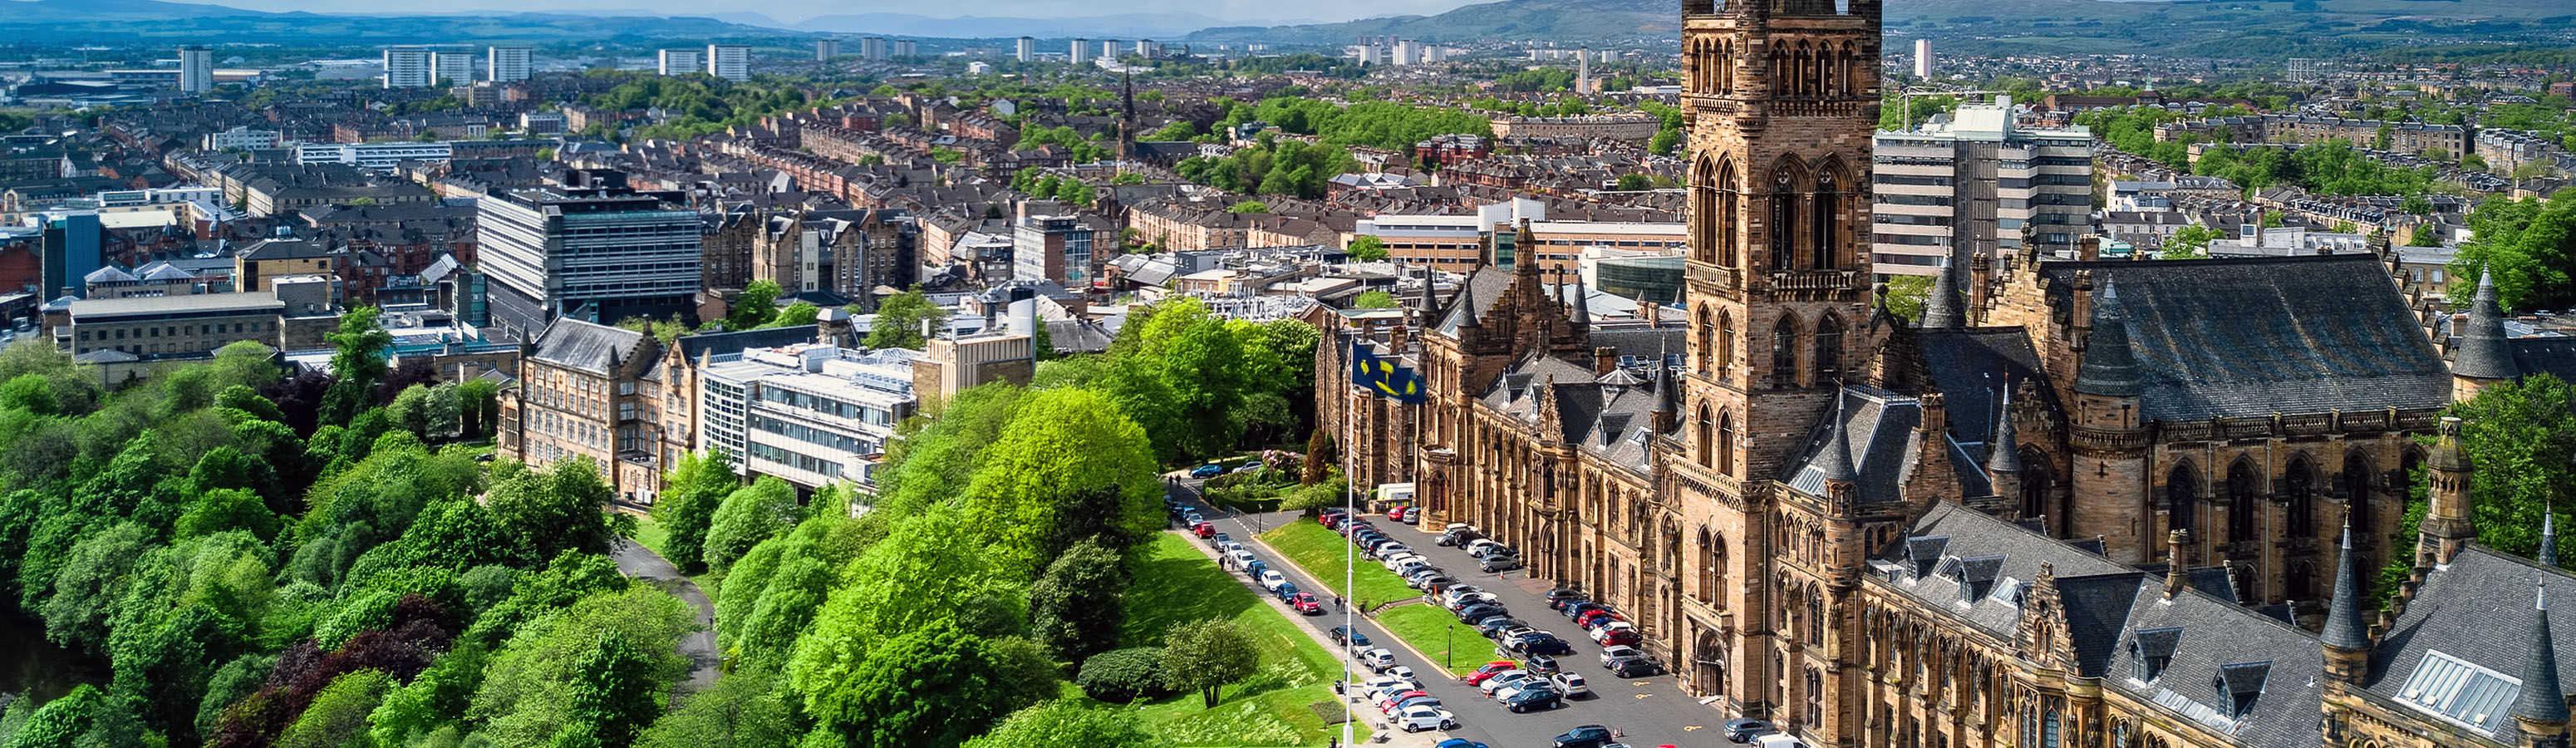 Cities in Scotland that you should not forget to visit